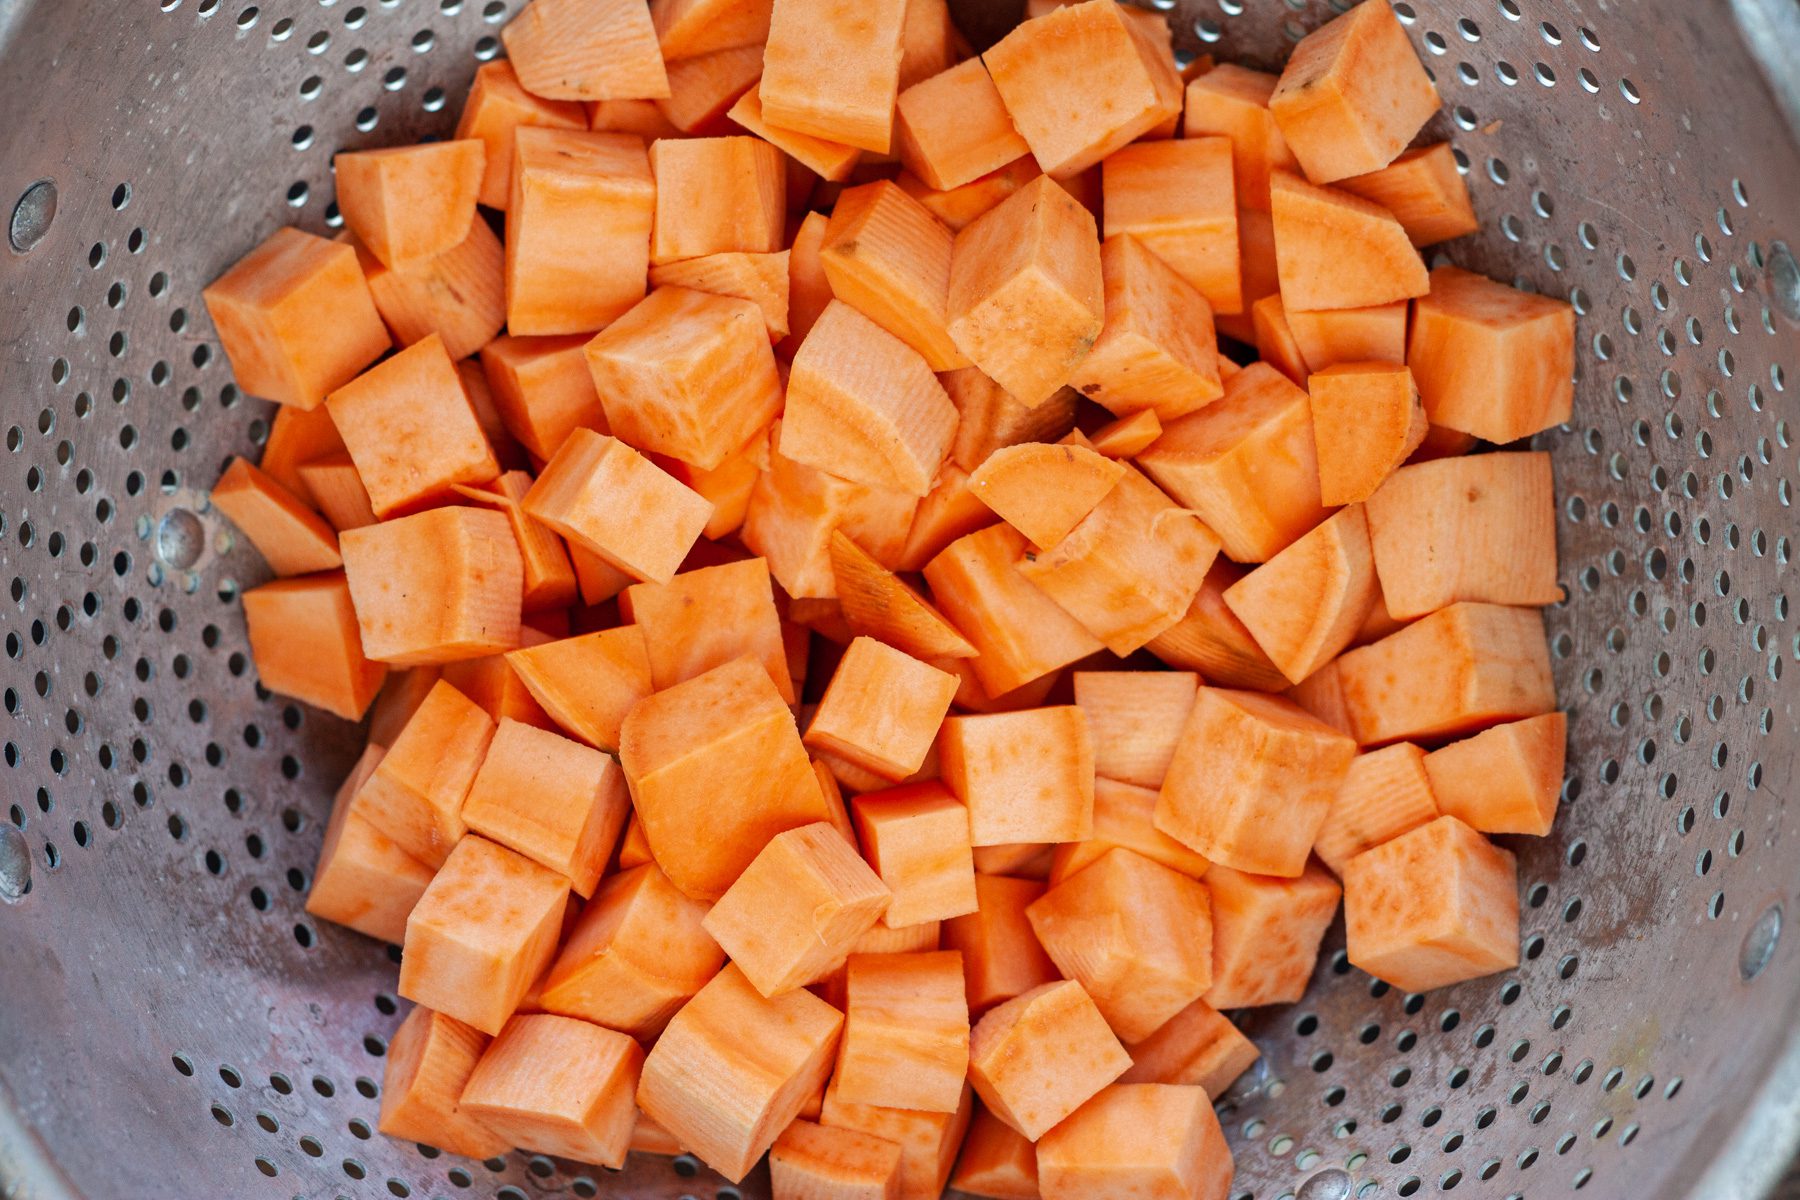 rinse sweet potato cubes with water before cooking